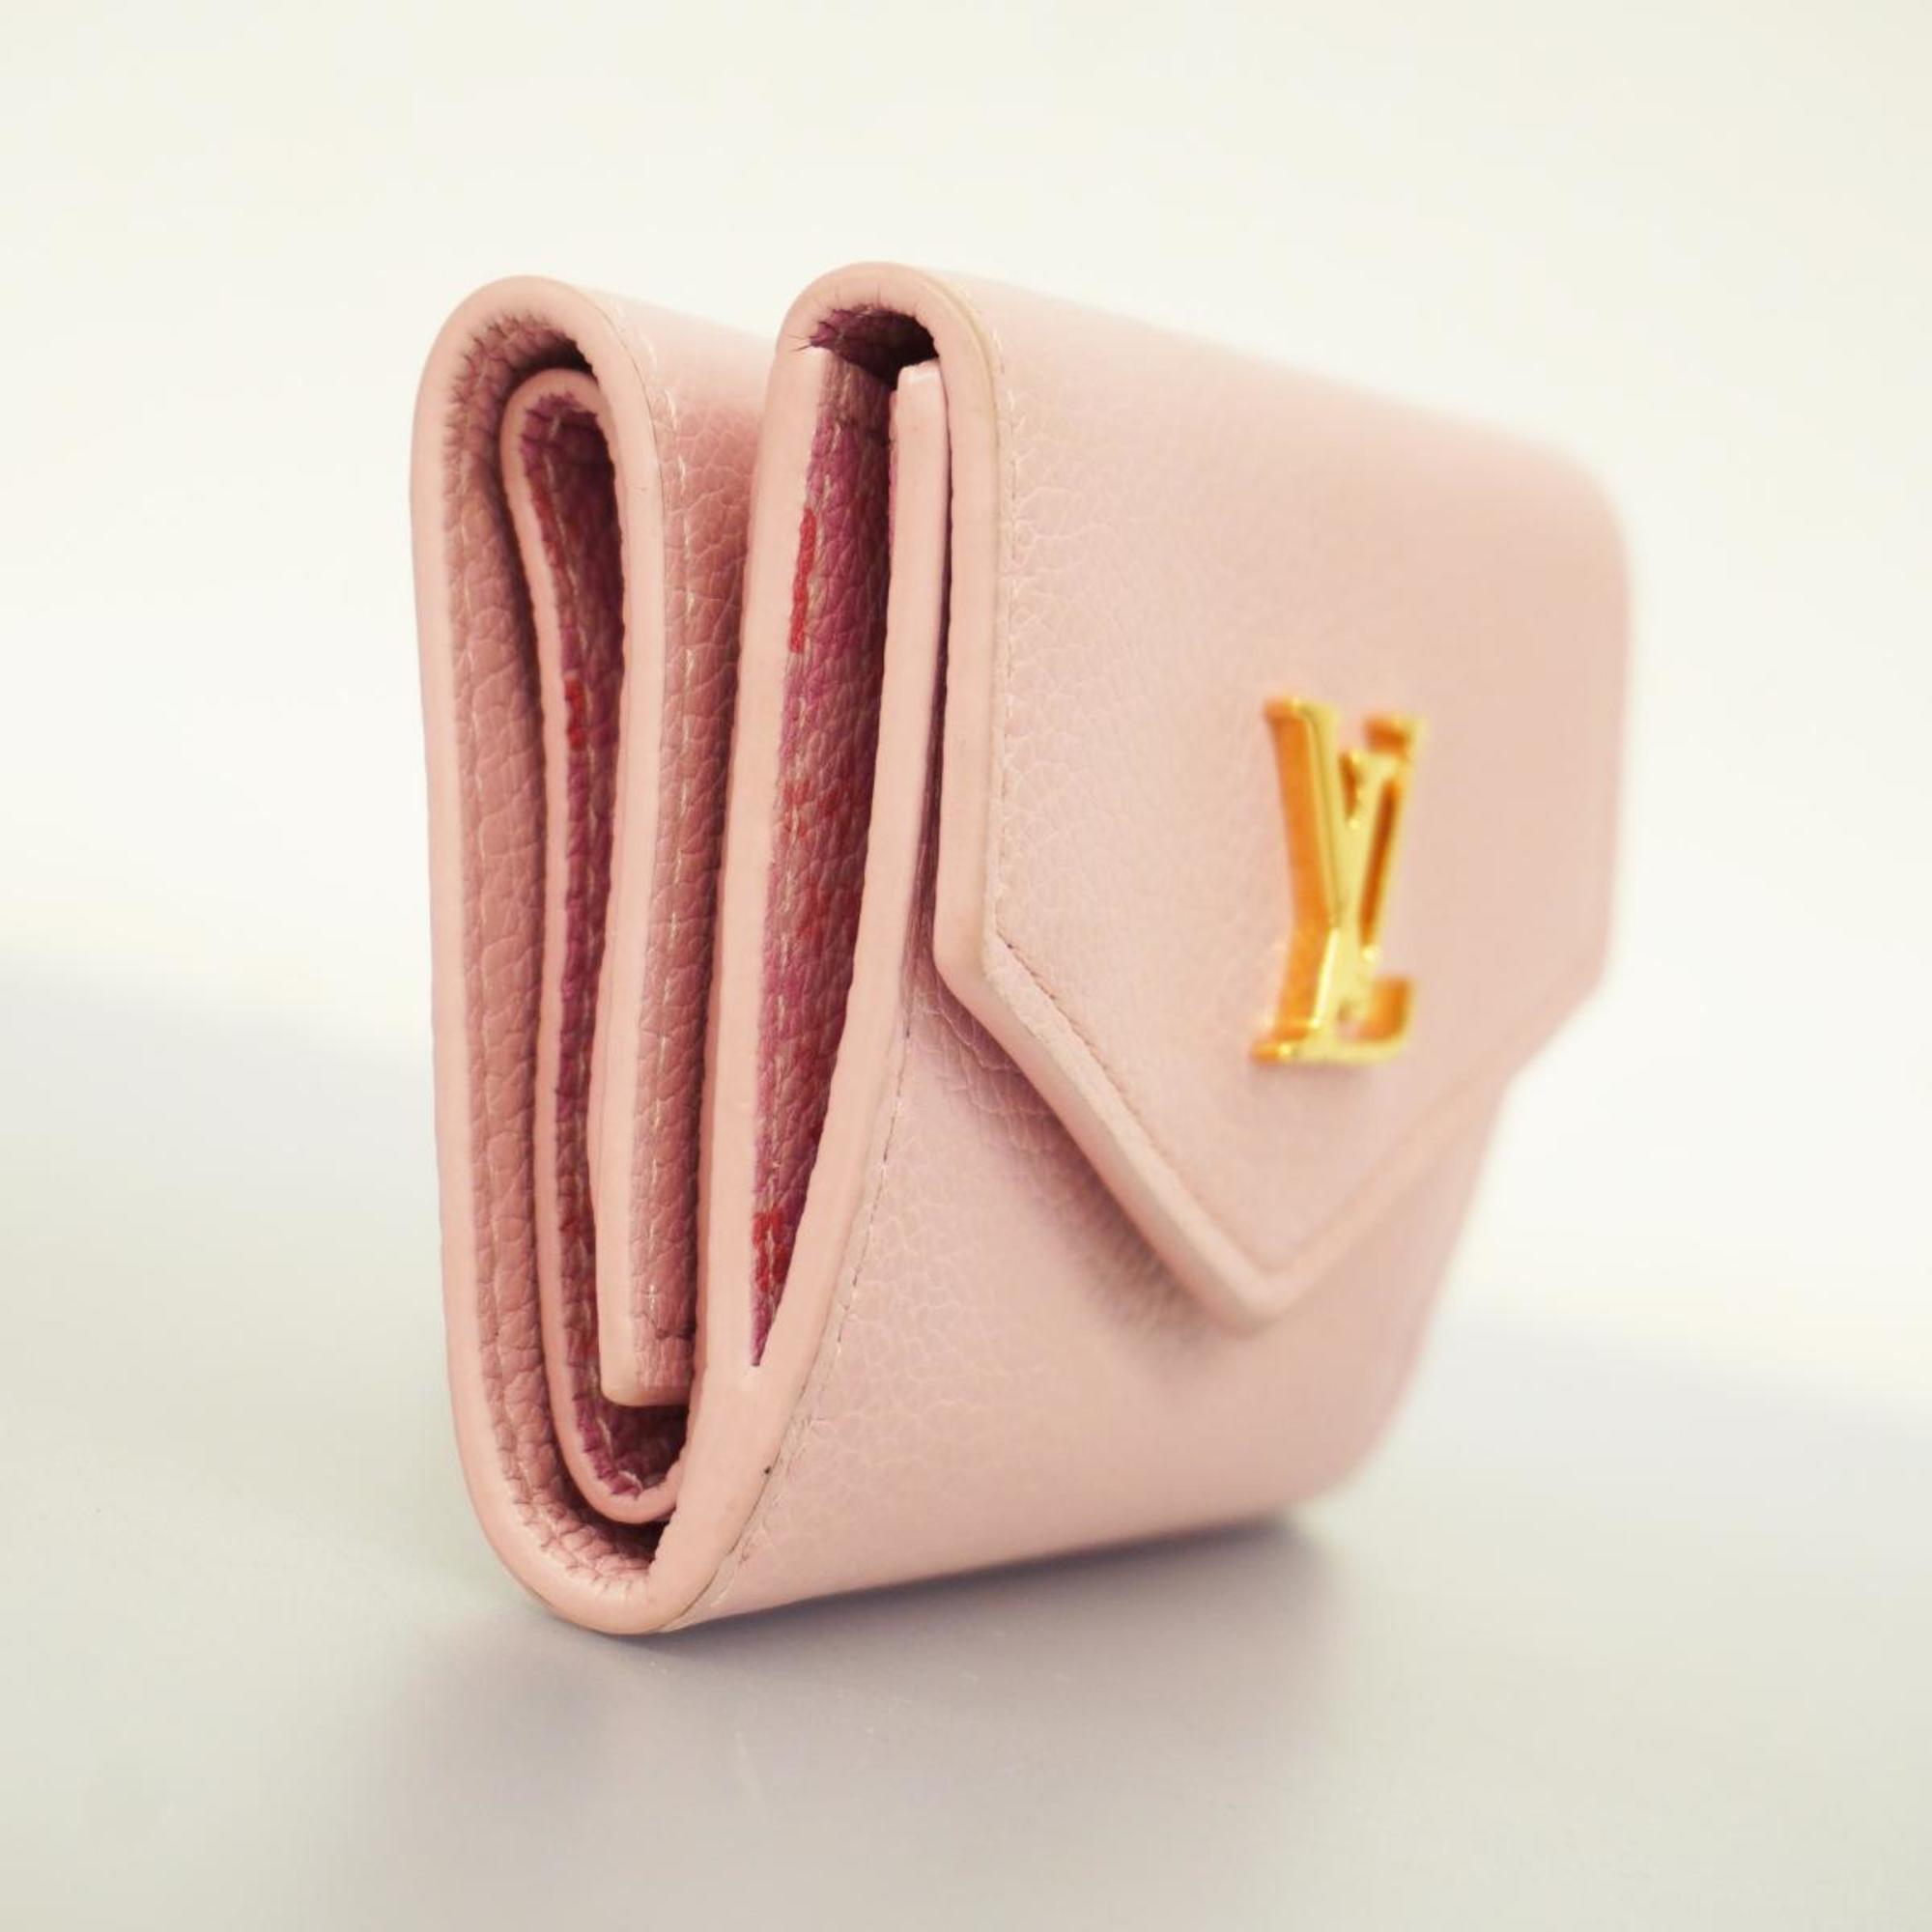 Louis Vuitton Tri-fold Wallet Portefeuille Lock M80088 Pink Limited Edition for Women